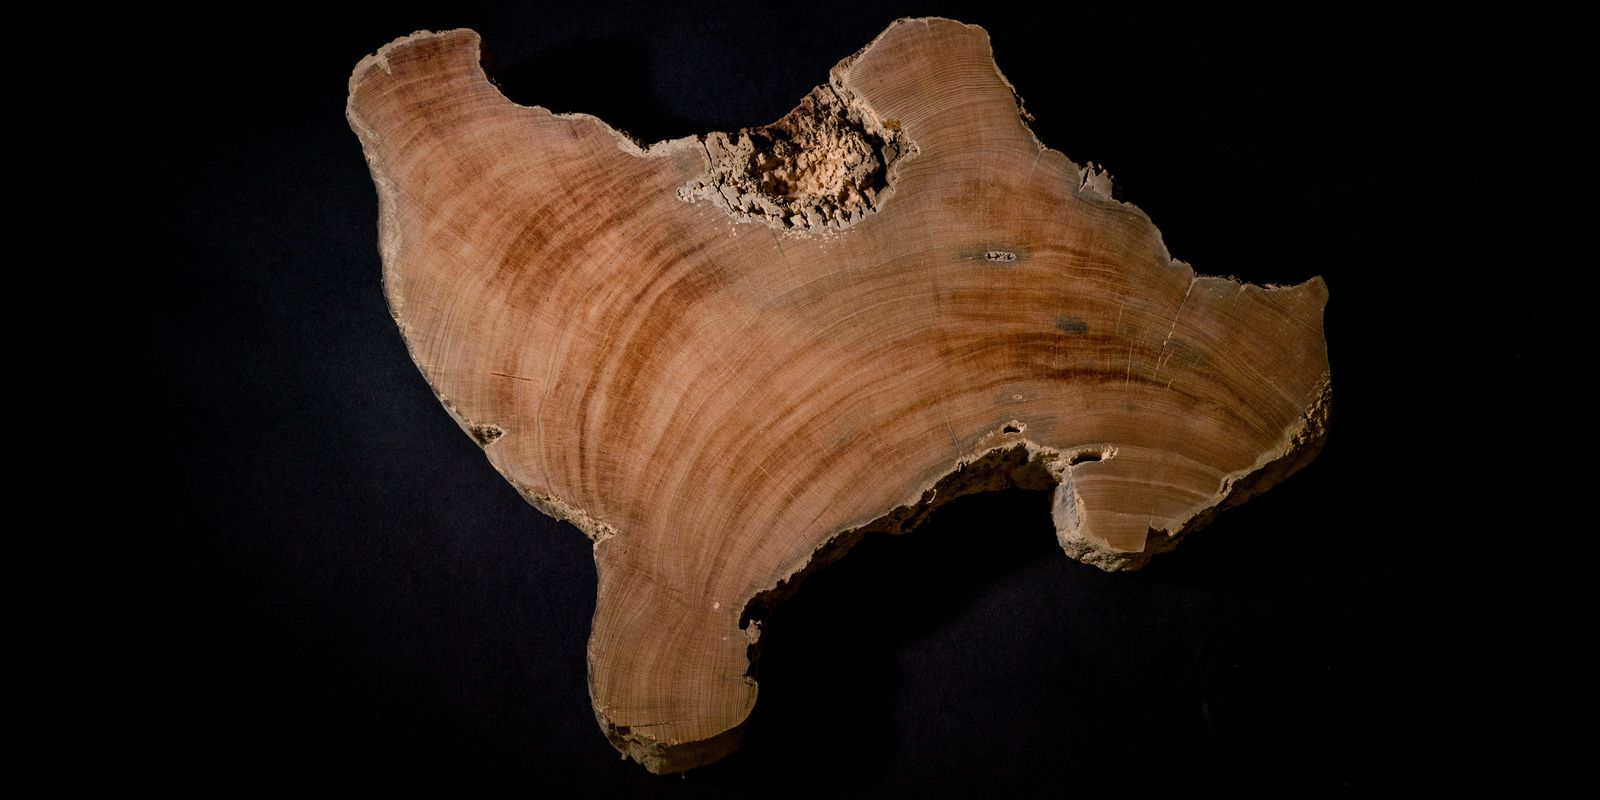 These tree samples came from more than 10,000 miles across the Pacific Ocean, in Tasmania, Australia